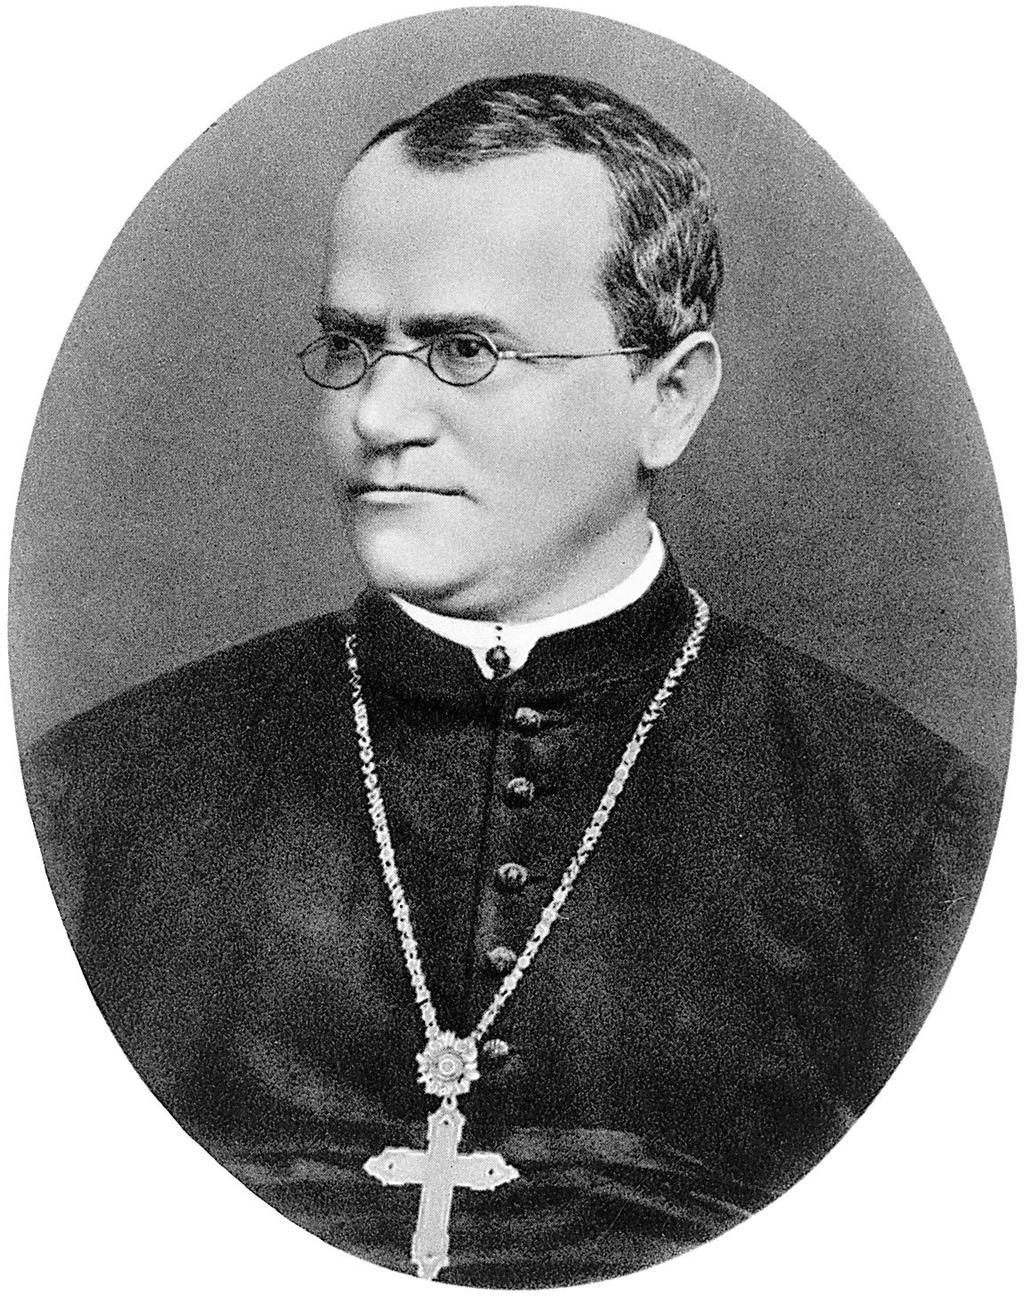 Gregor Mendel (1822-1884) is known as the father of modern genetics.